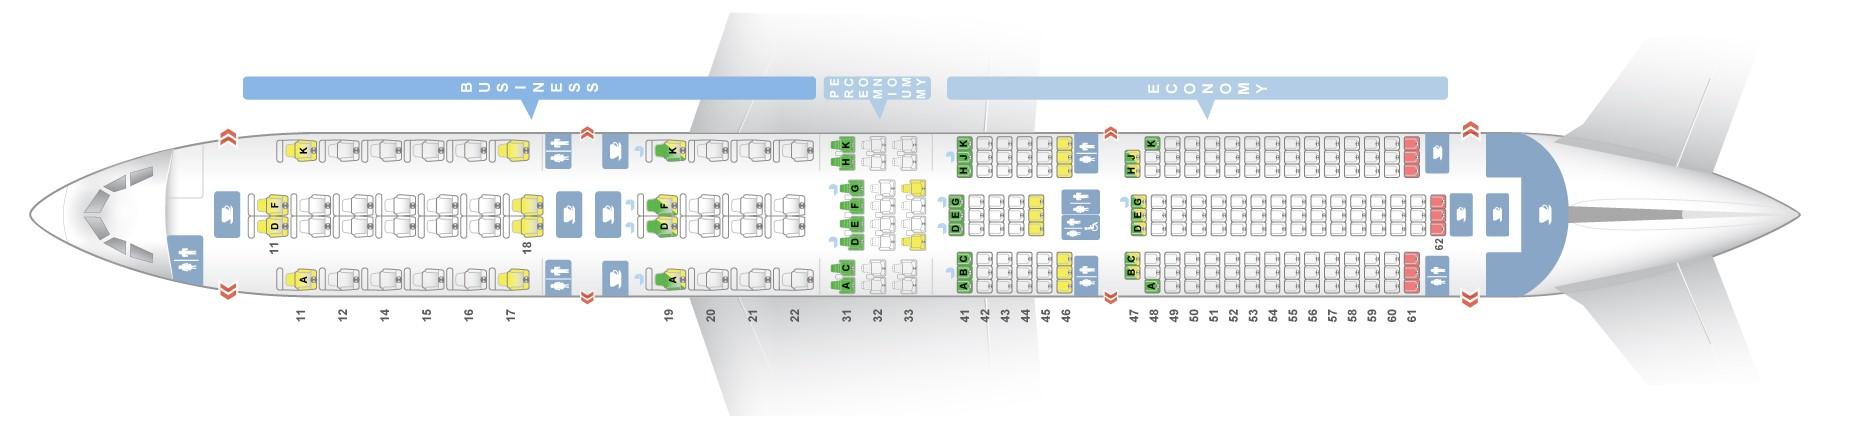 Seat map Airbus A350-900 Singapore Airlines. Best seats in plane